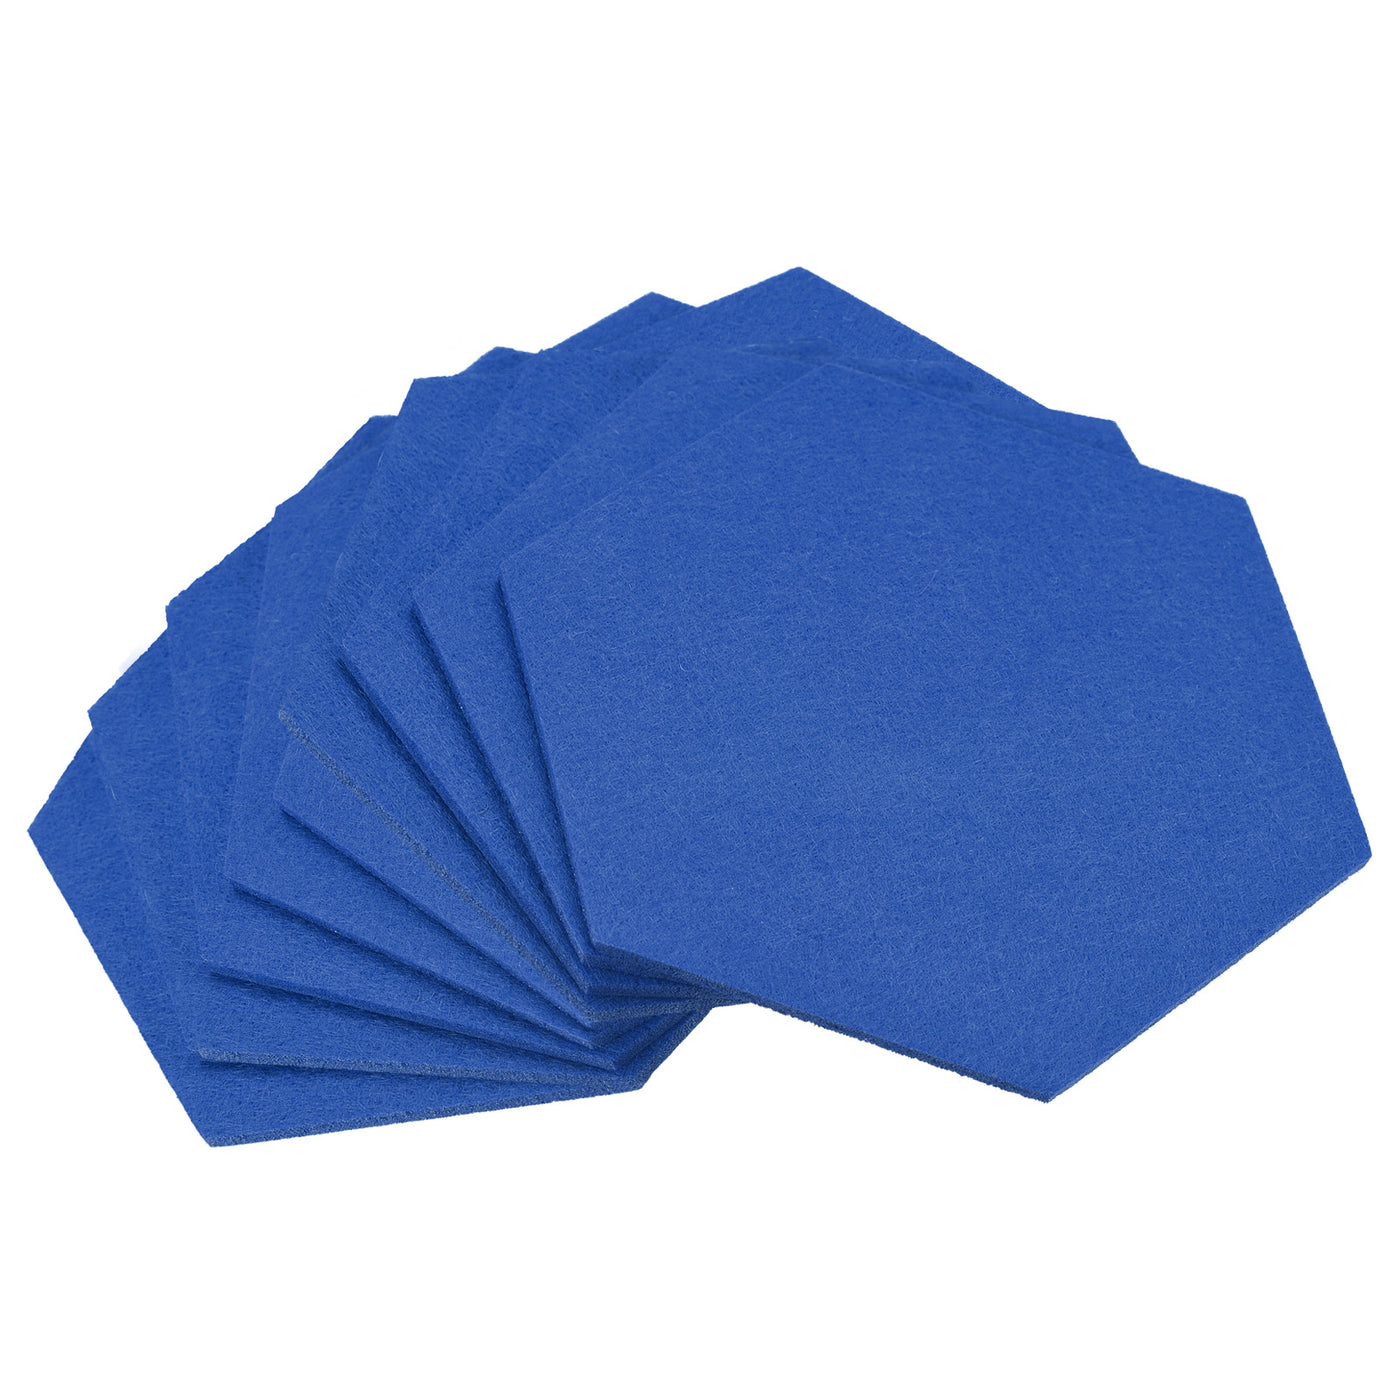 uxcell Uxcell Felt Coasters 9pcs Absorbent Pad Coaster for Drink Cup Pot Bowl Vase Blue